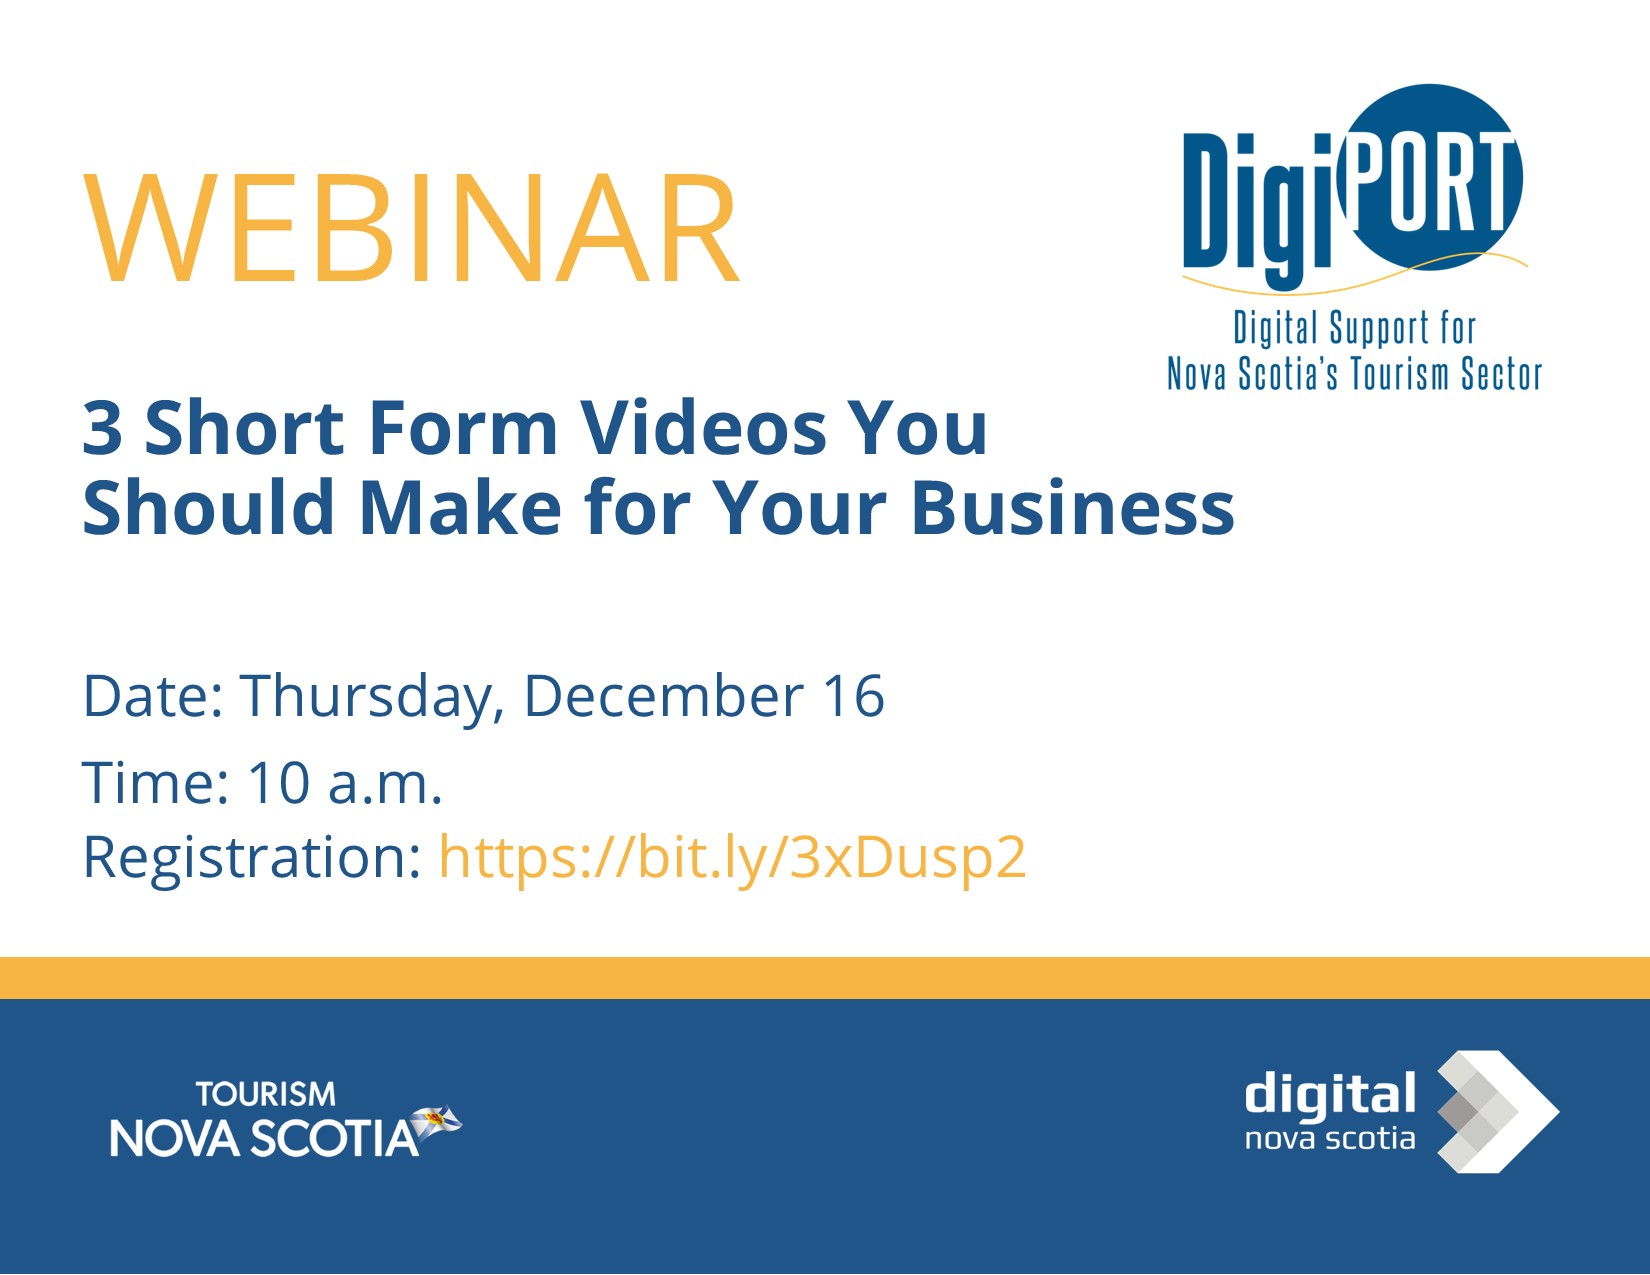 Webinar: Three Short Form Videos to Make for Your Business. Date: Thursday, December 16. Time: 10a.m.